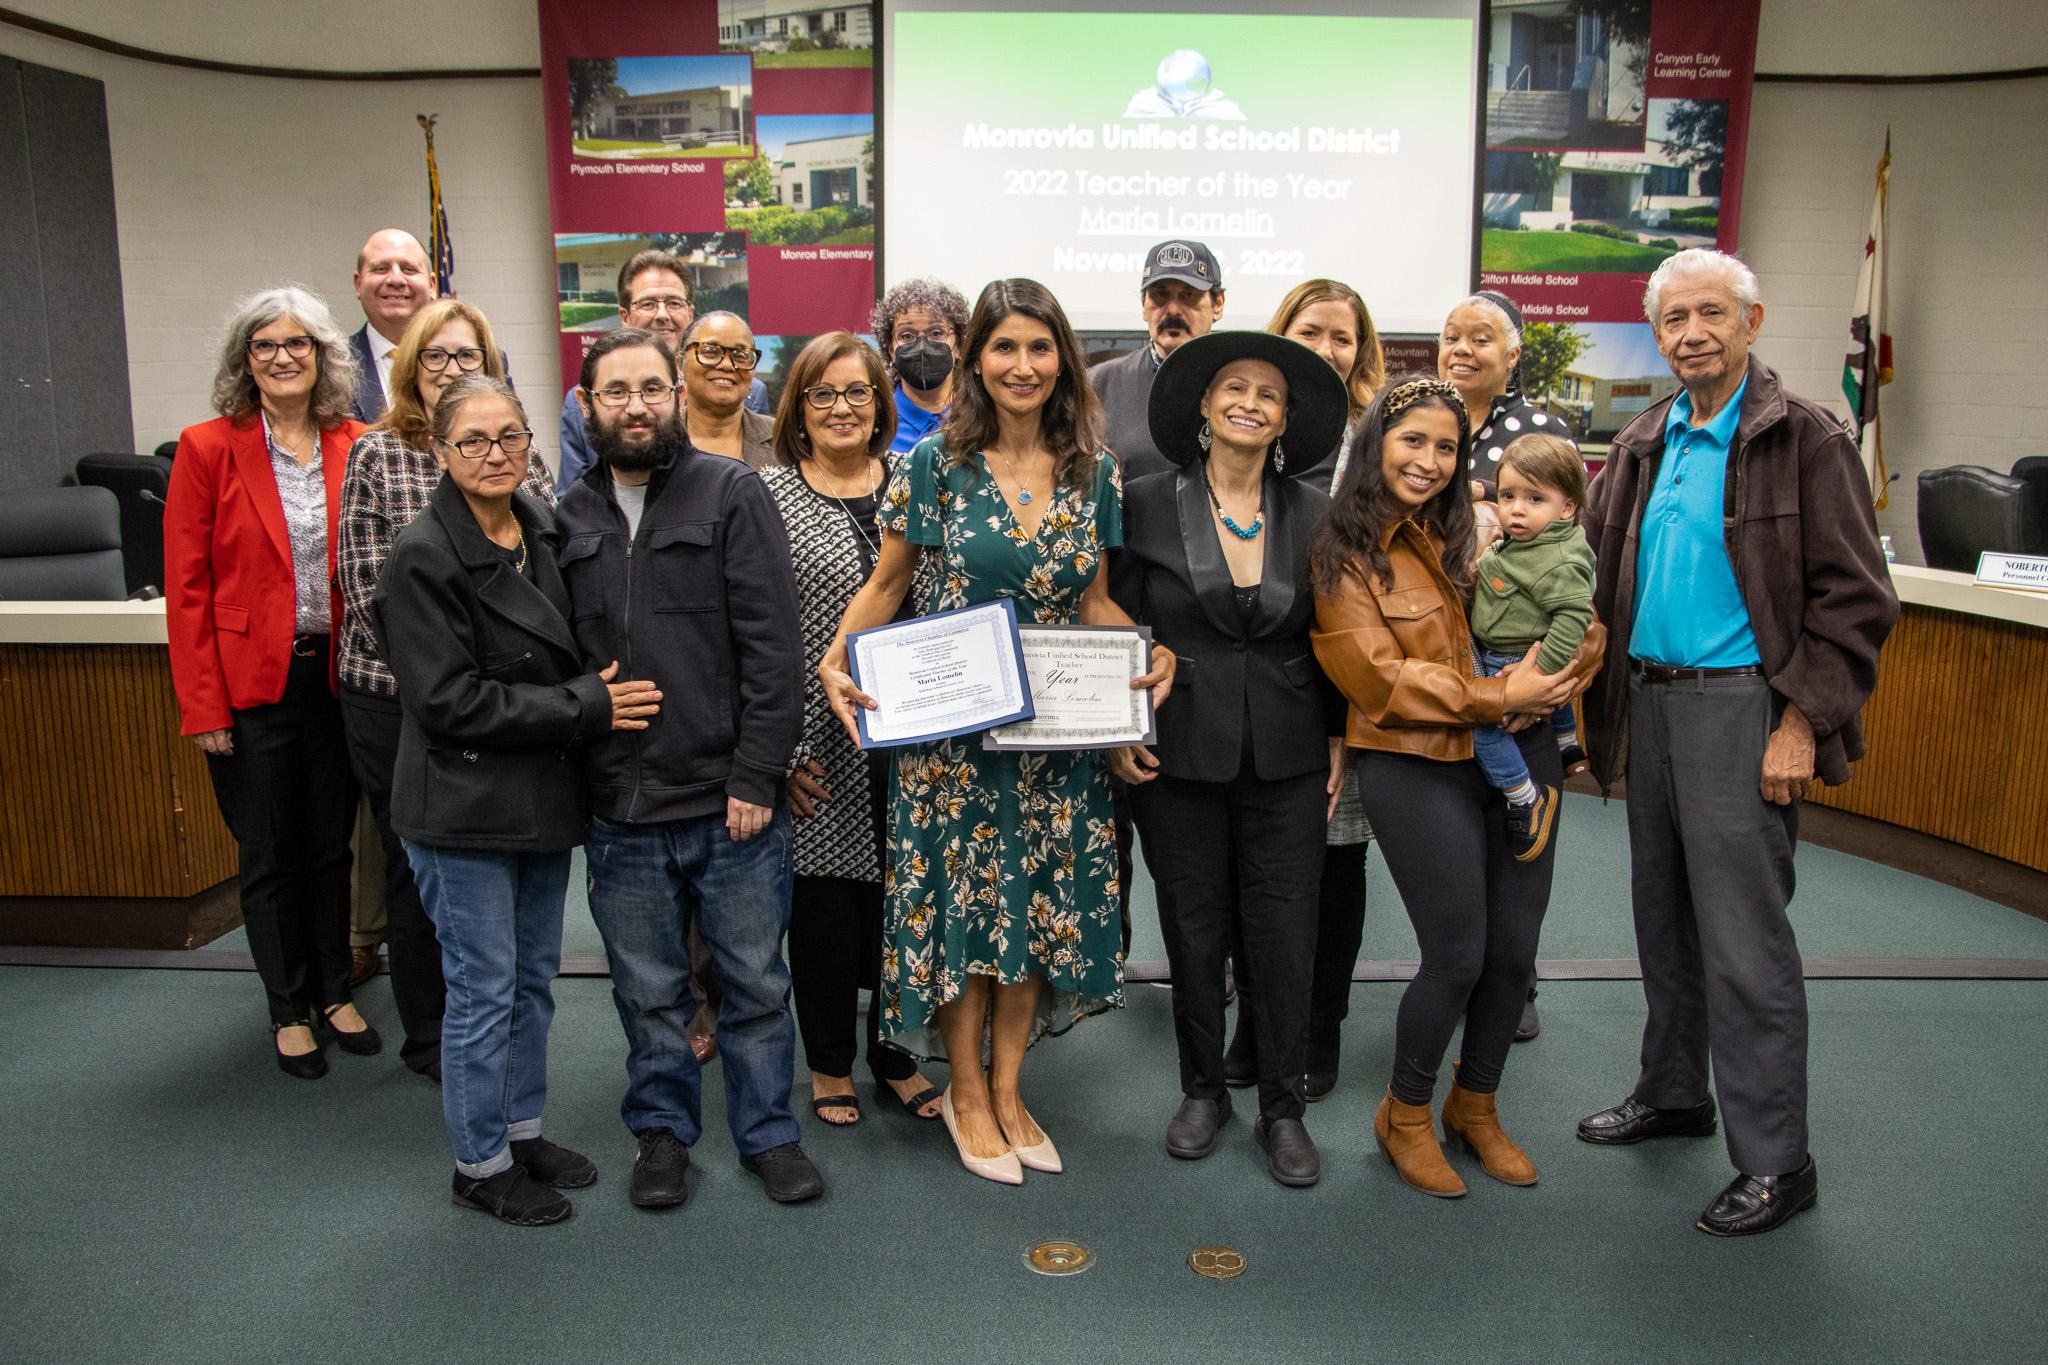 The Board of Education and the Personnel Commission congratulated Maria Lomelin on being named the "2022 Teacher of the Year" for Monrovia Unified School District.